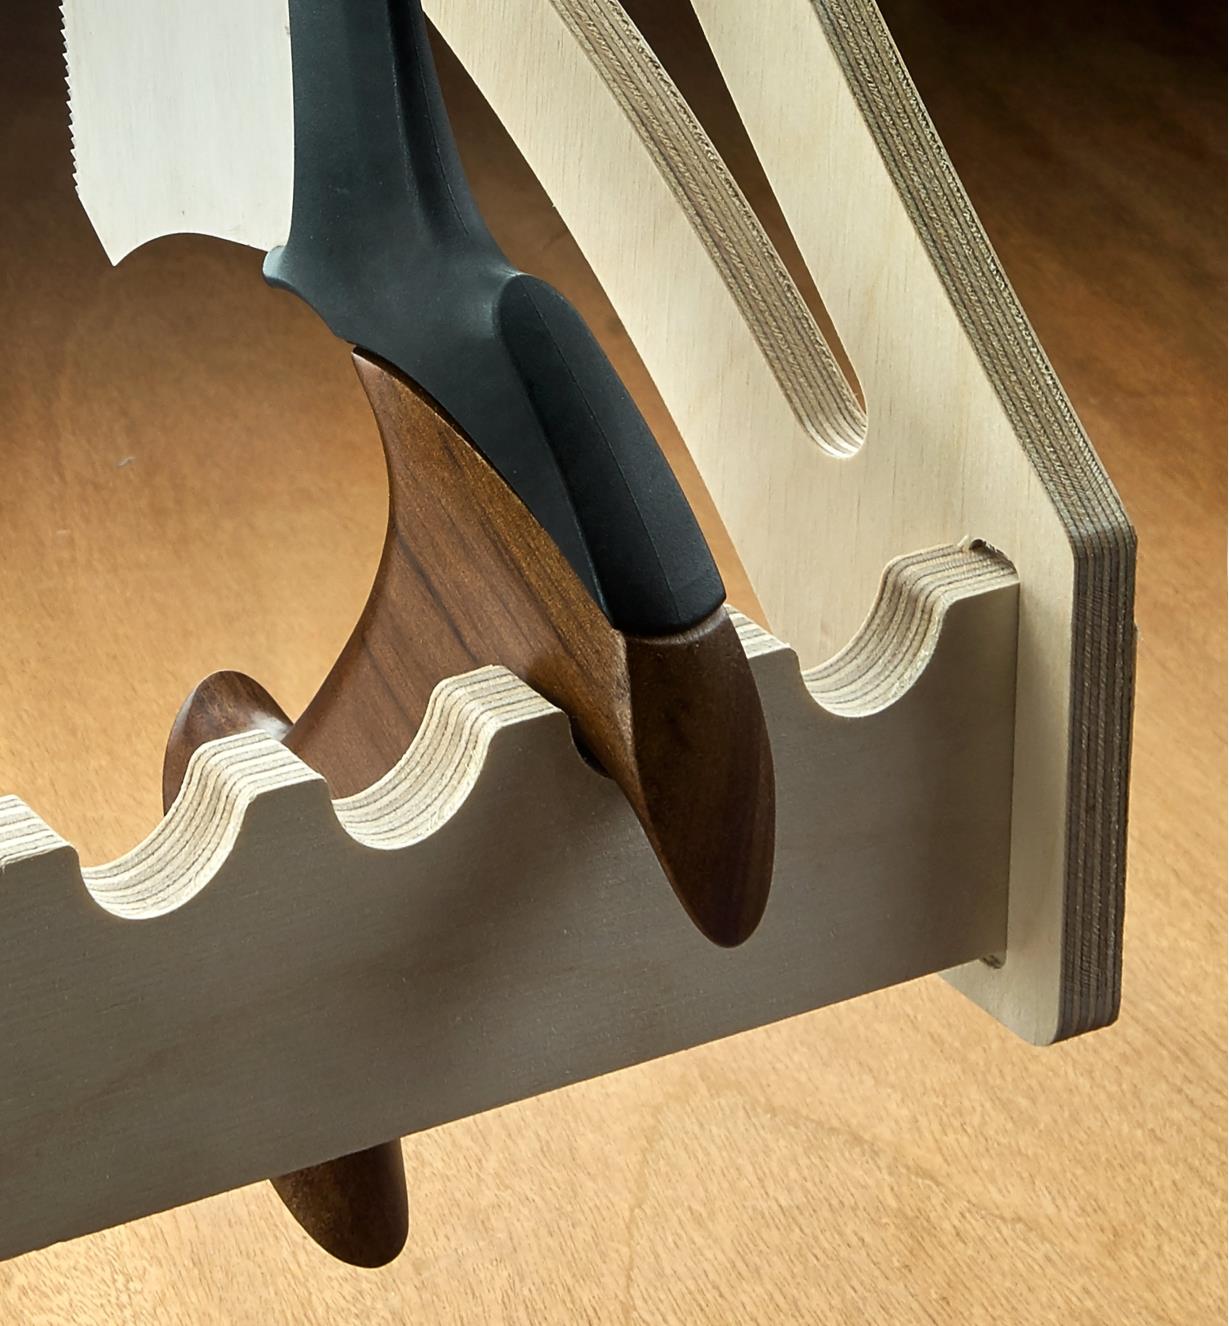 A close-up of a saw handle resting in one of the rounded cutouts at the bottom of the four-saw till